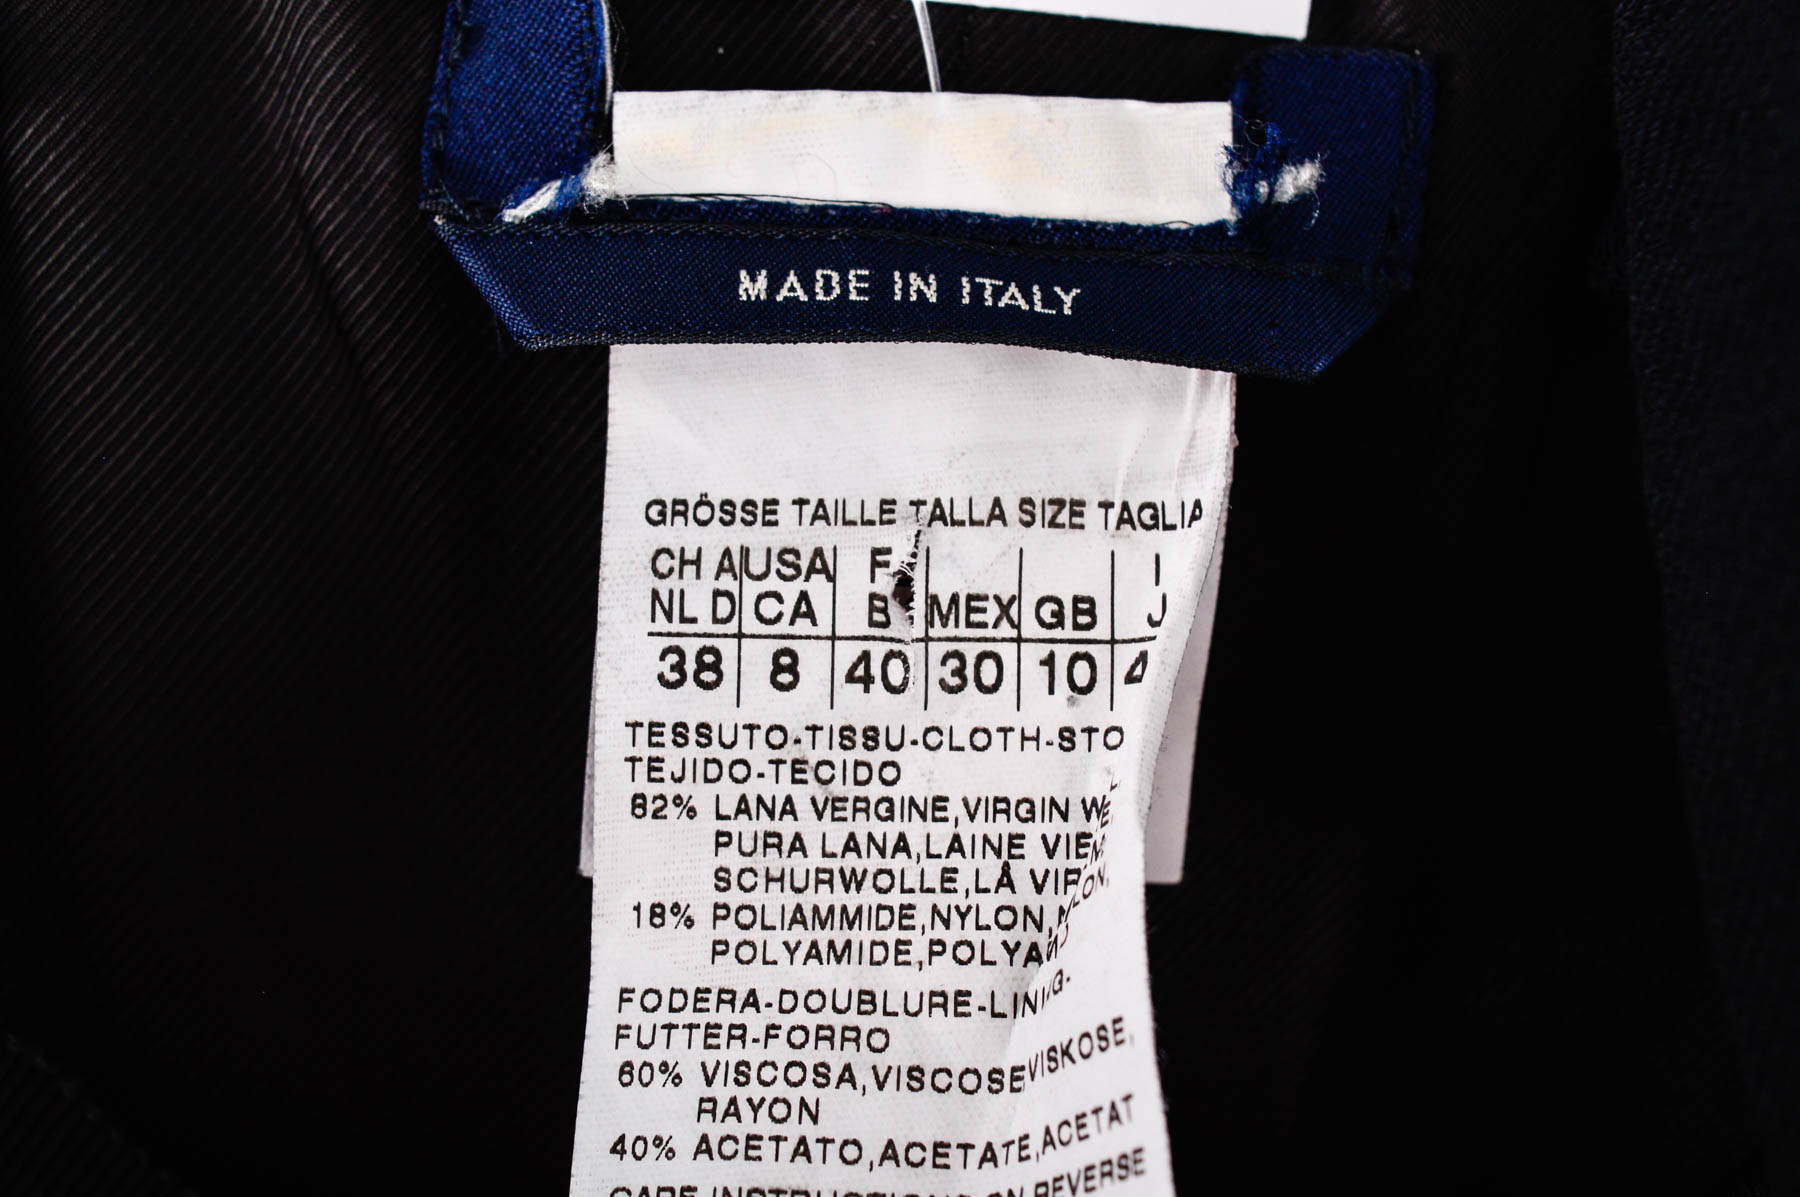 Dress - Made in Italy - 2